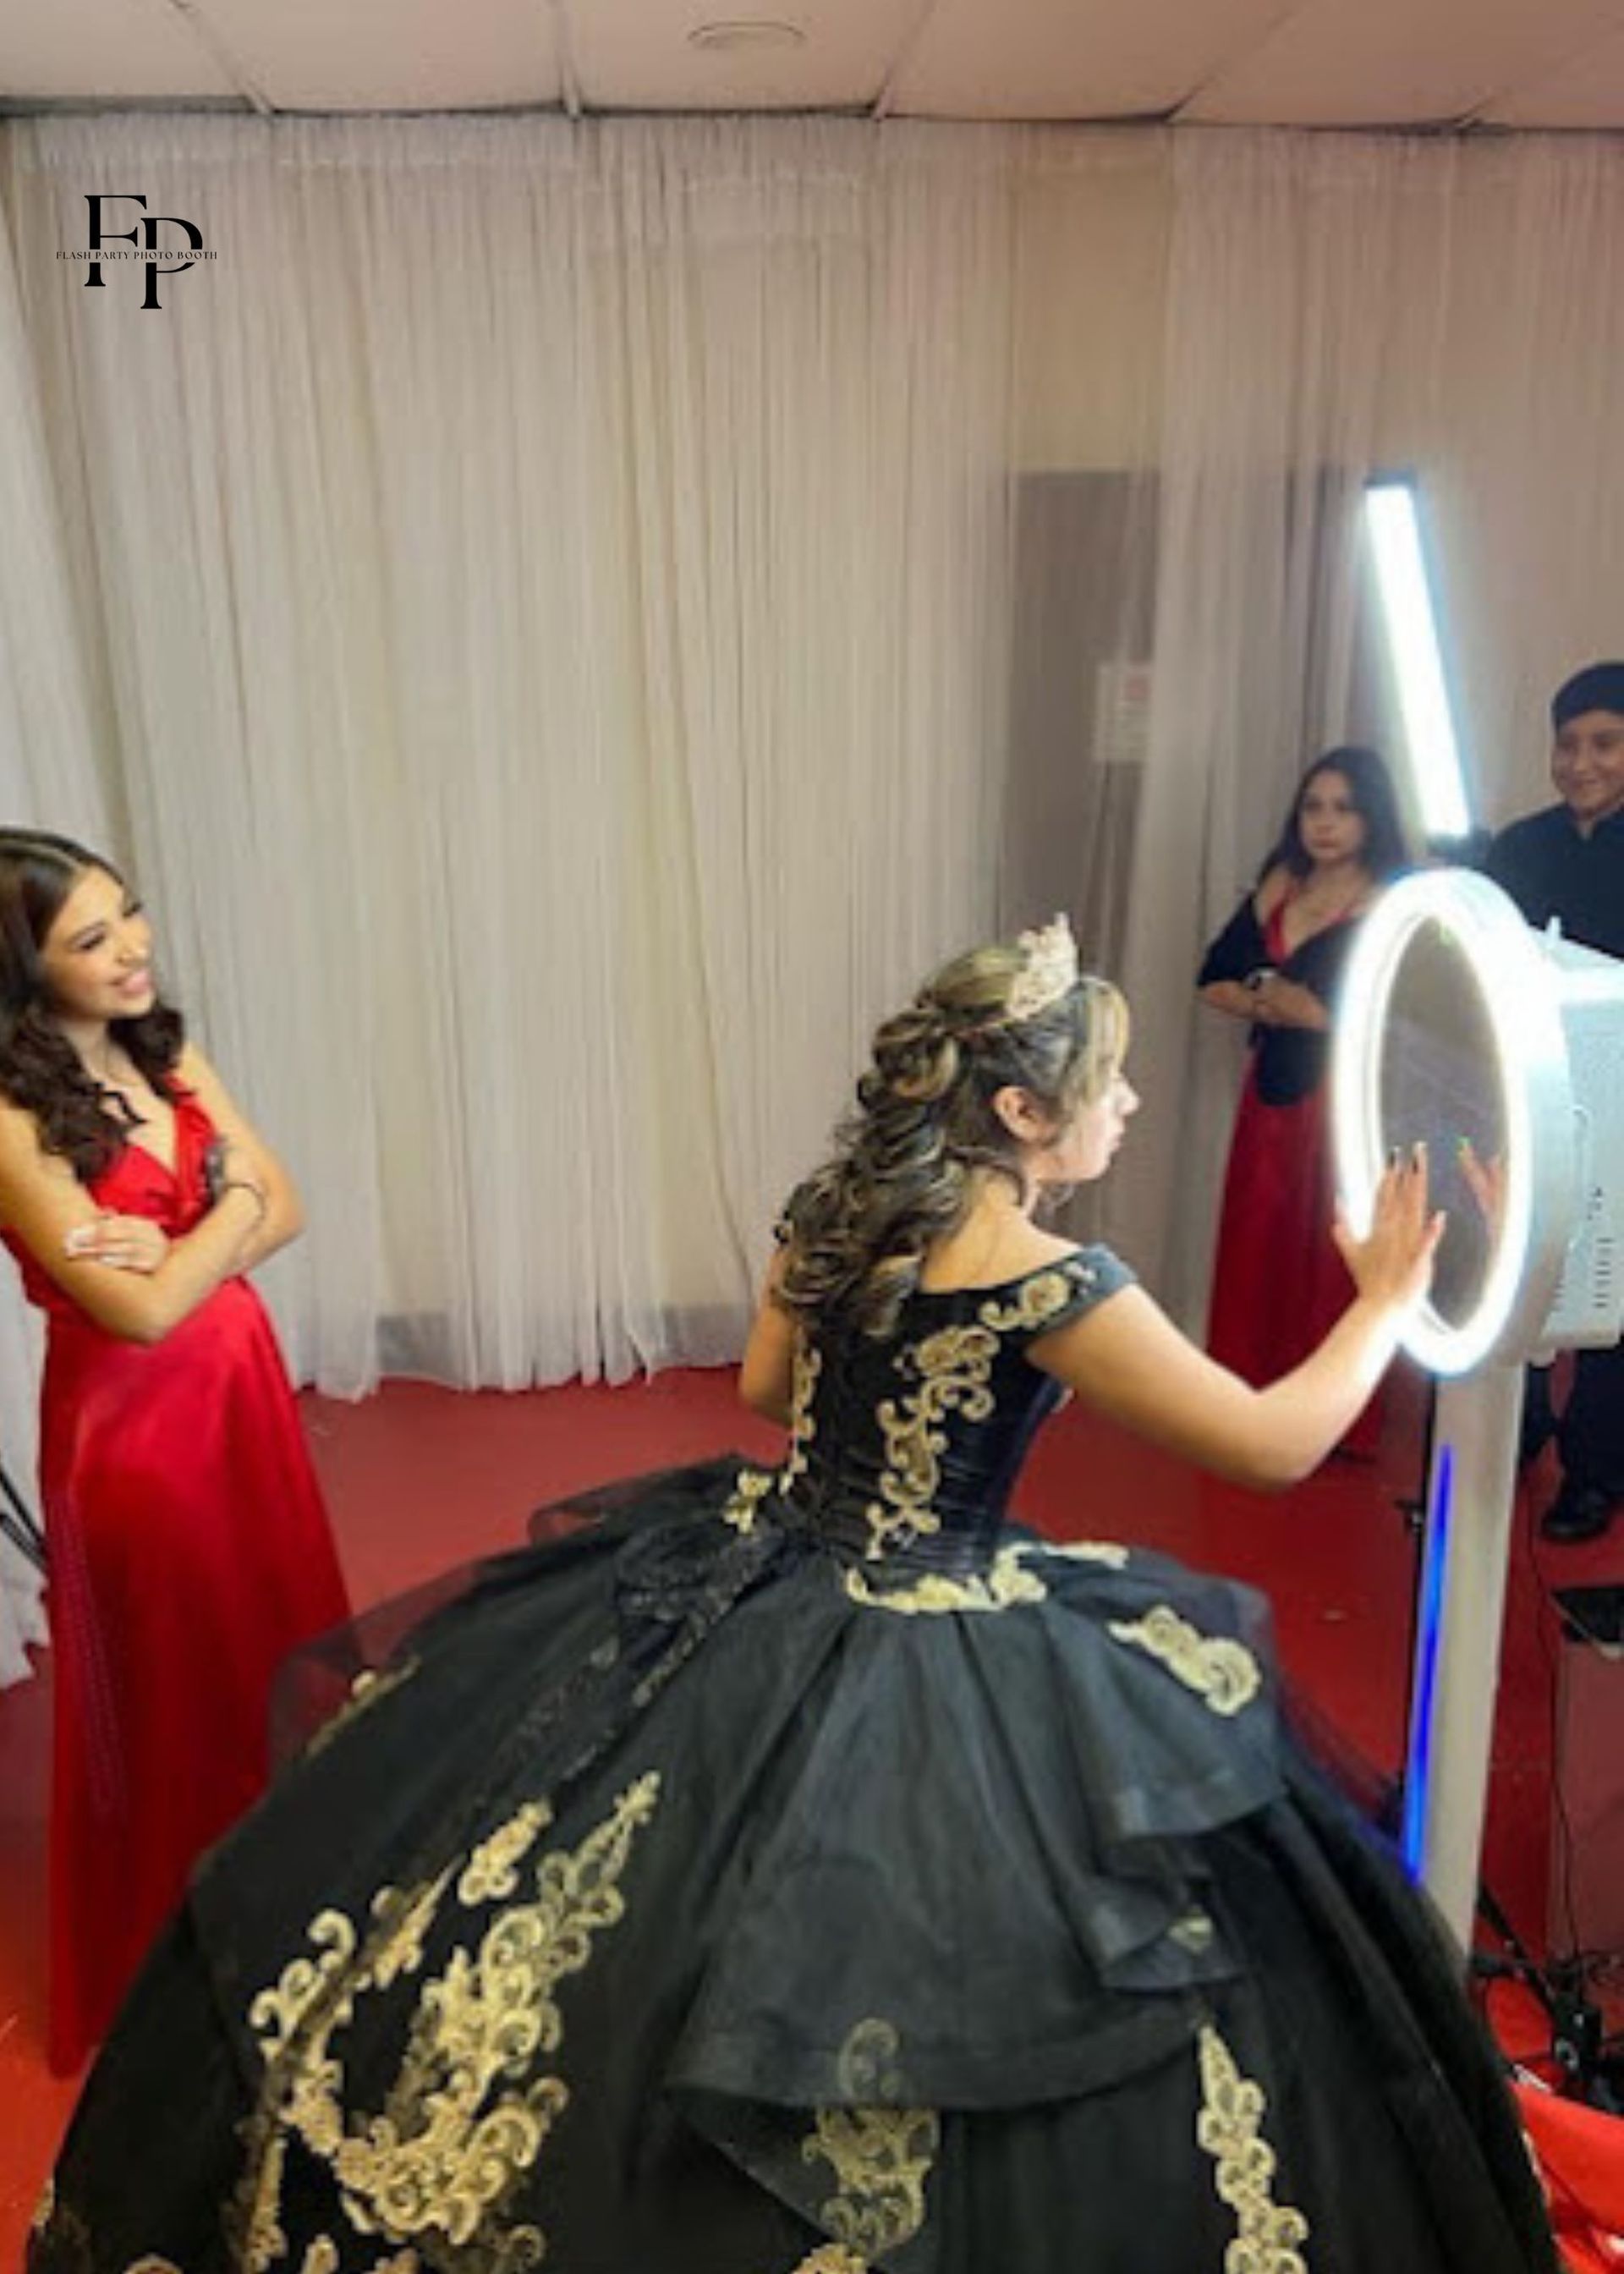 Prom attendees strike a pose together at a Cloee Photo Booth.